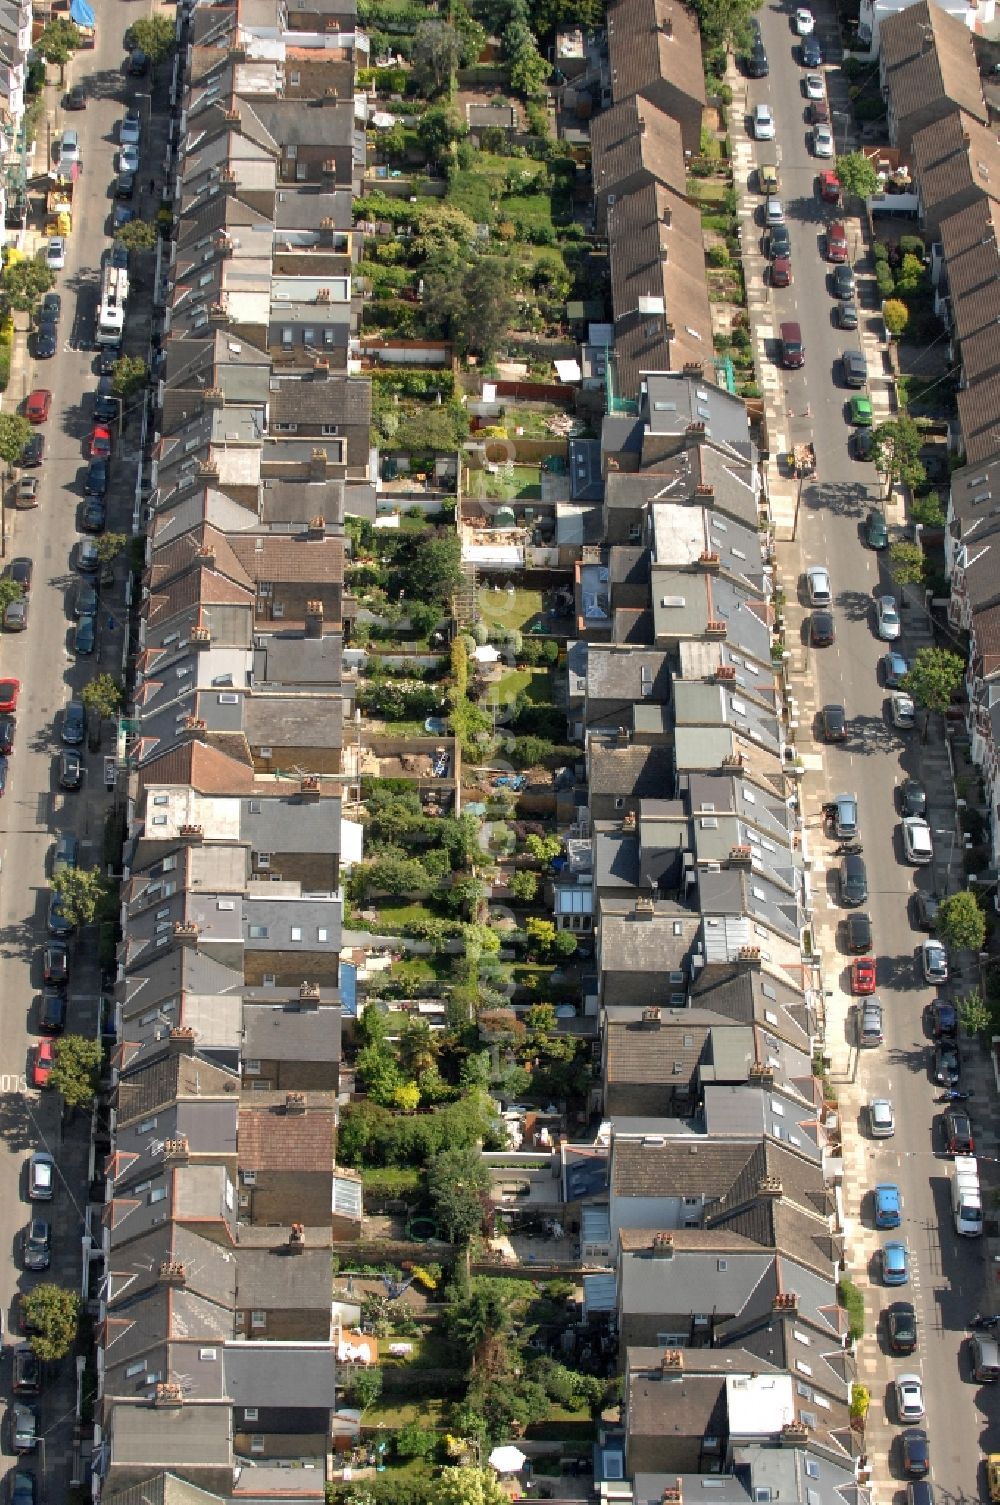 London from the bird's eye view: 20/06/2012 LONDON city view from London on Wimbledon Park residential area, the typical British home series between settlements arose at the Merton Rd, Brookwood Rd, Revelstoke Road in the 70s